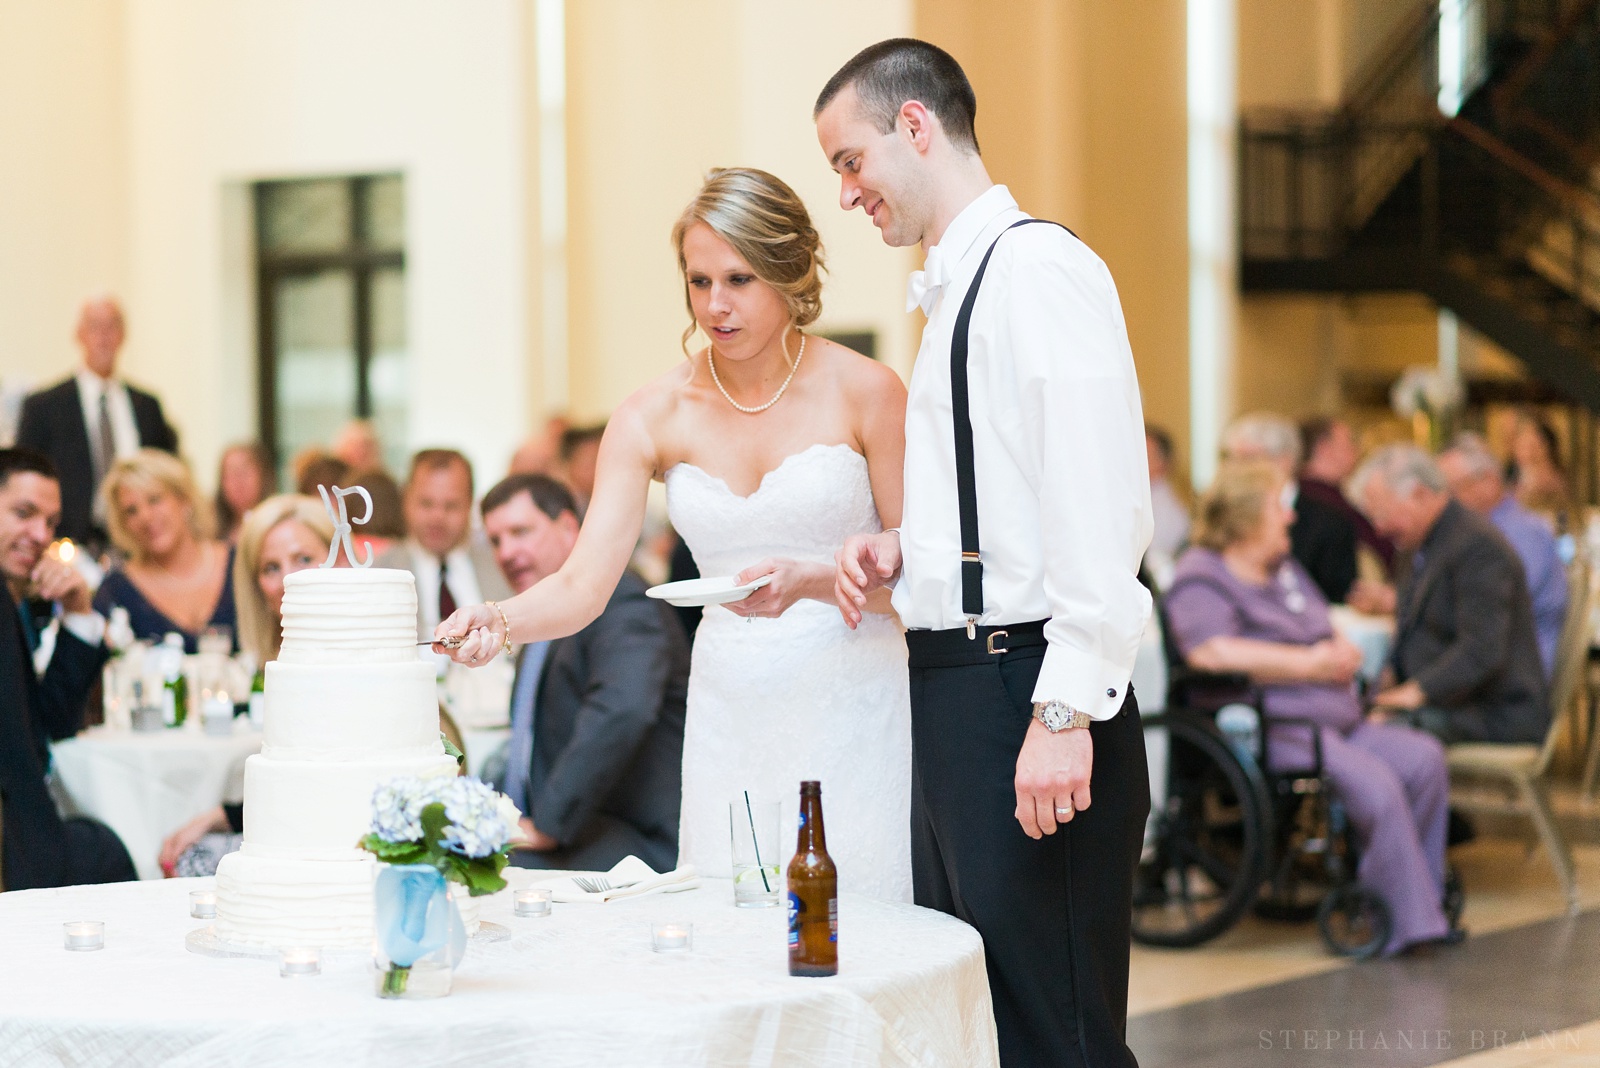 couple-cutting-their-wedding-cake-surrounded-by-their-guests